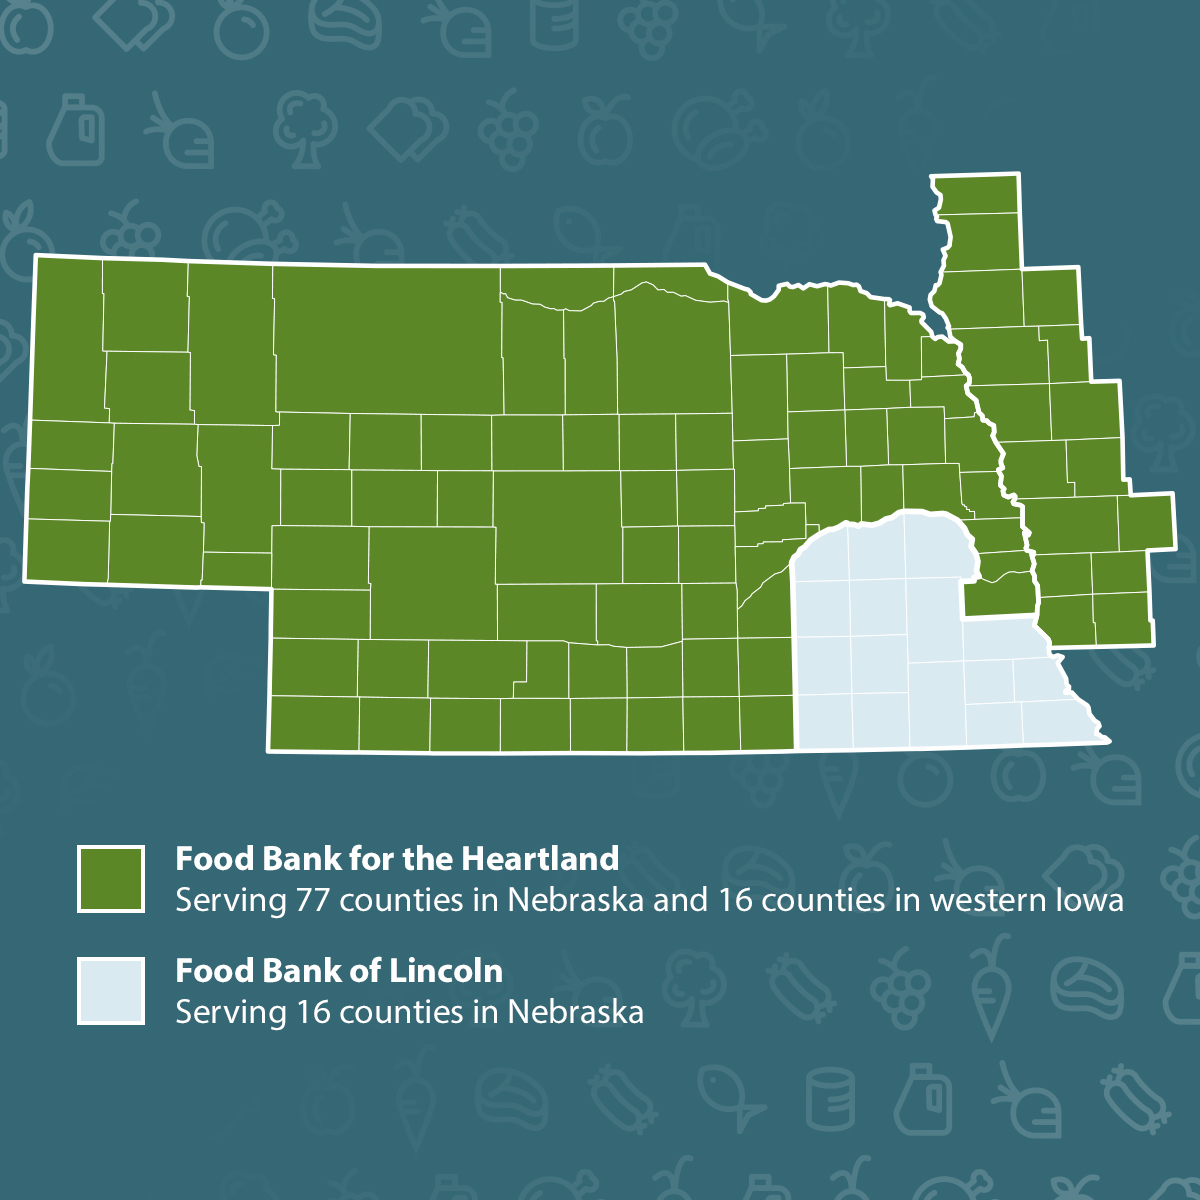 Food Bank For the Heartland Service Area Map: Serving 93 counties in Nebraska and western Iowa